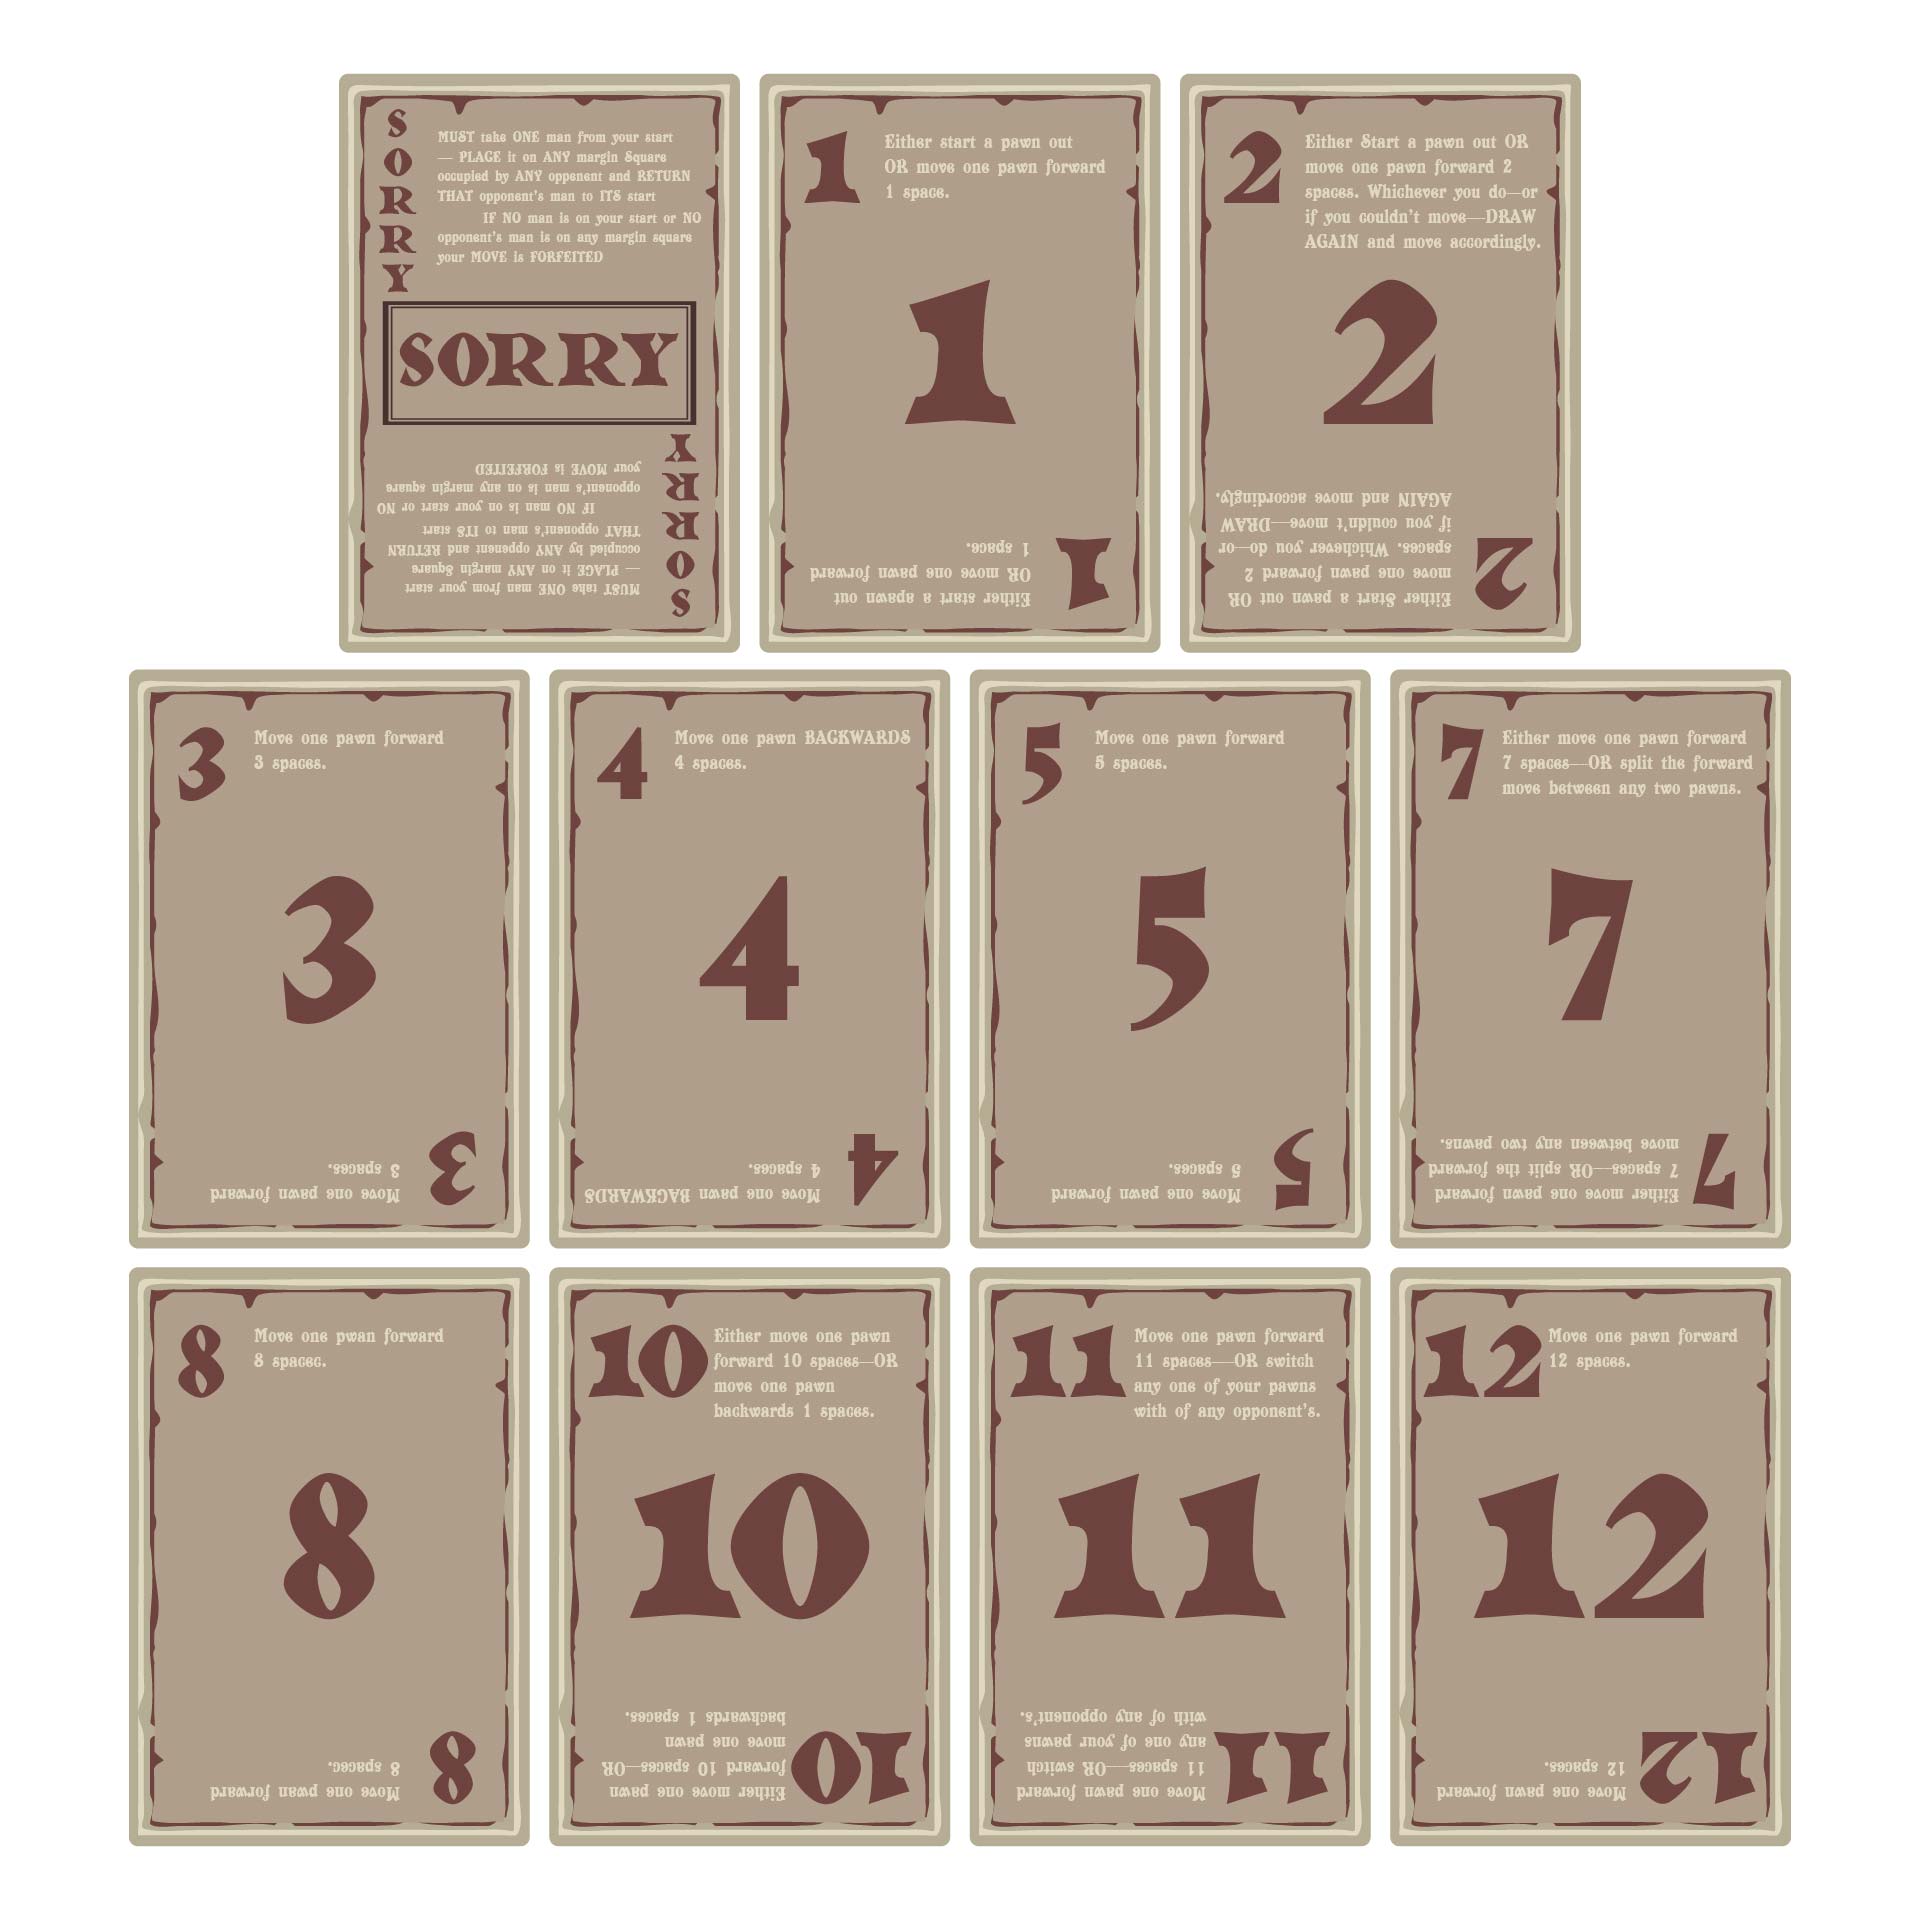 Sorry Game Cards Printable